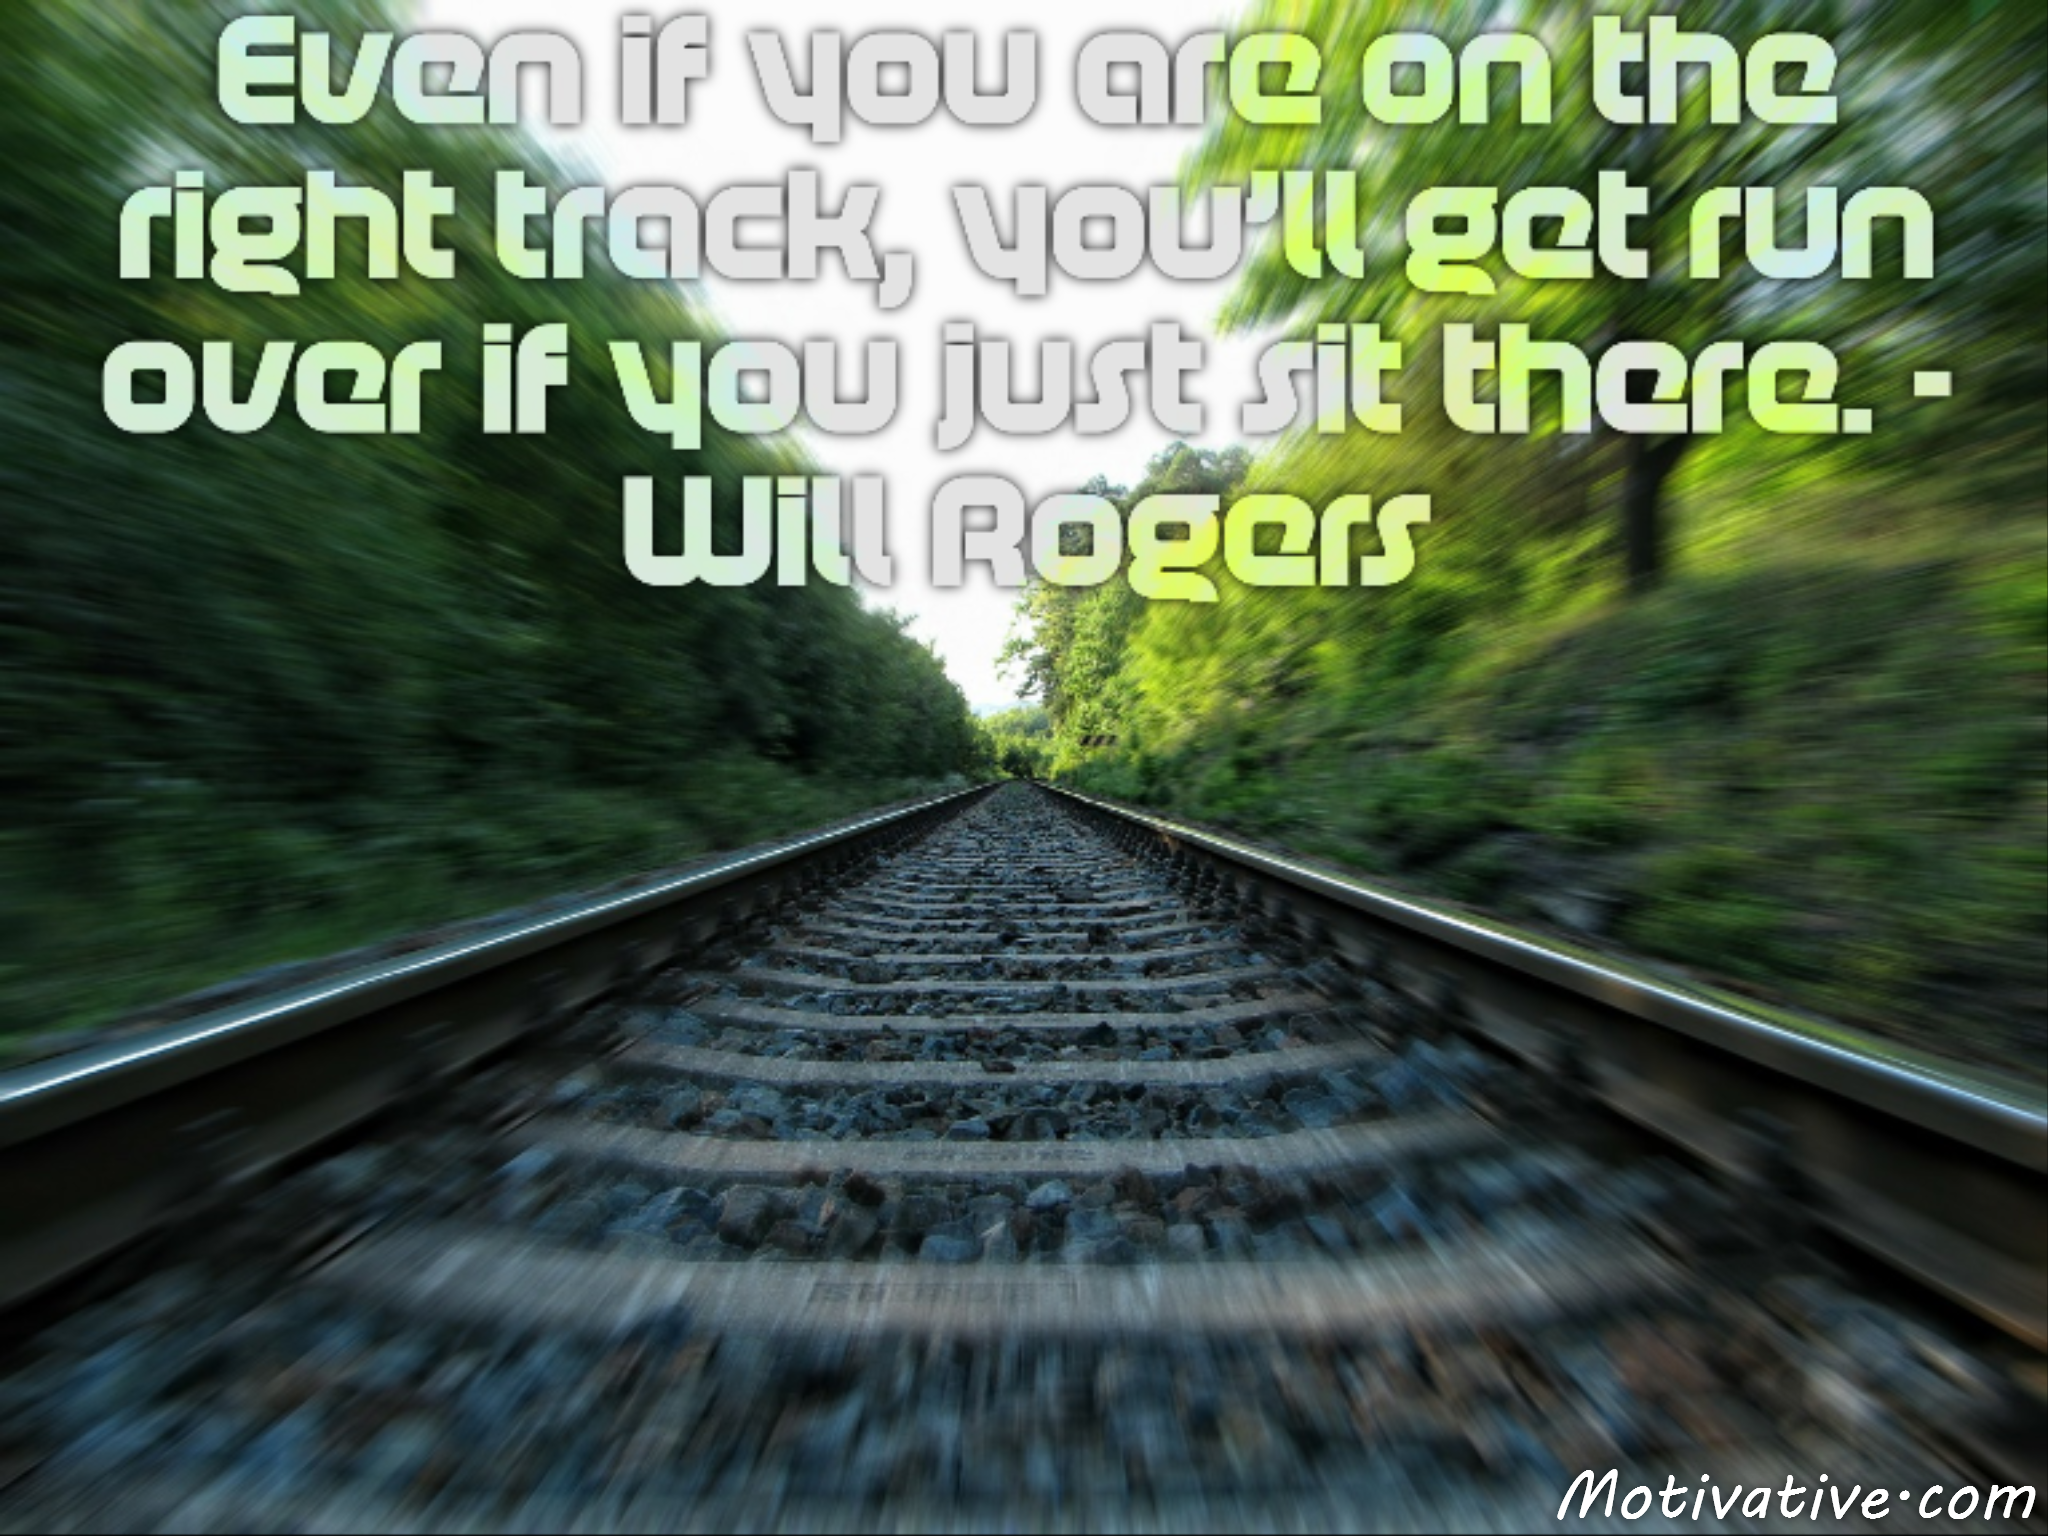 Even if you are on the right track, you’ll get run over if you just sit there. – Will Rogers